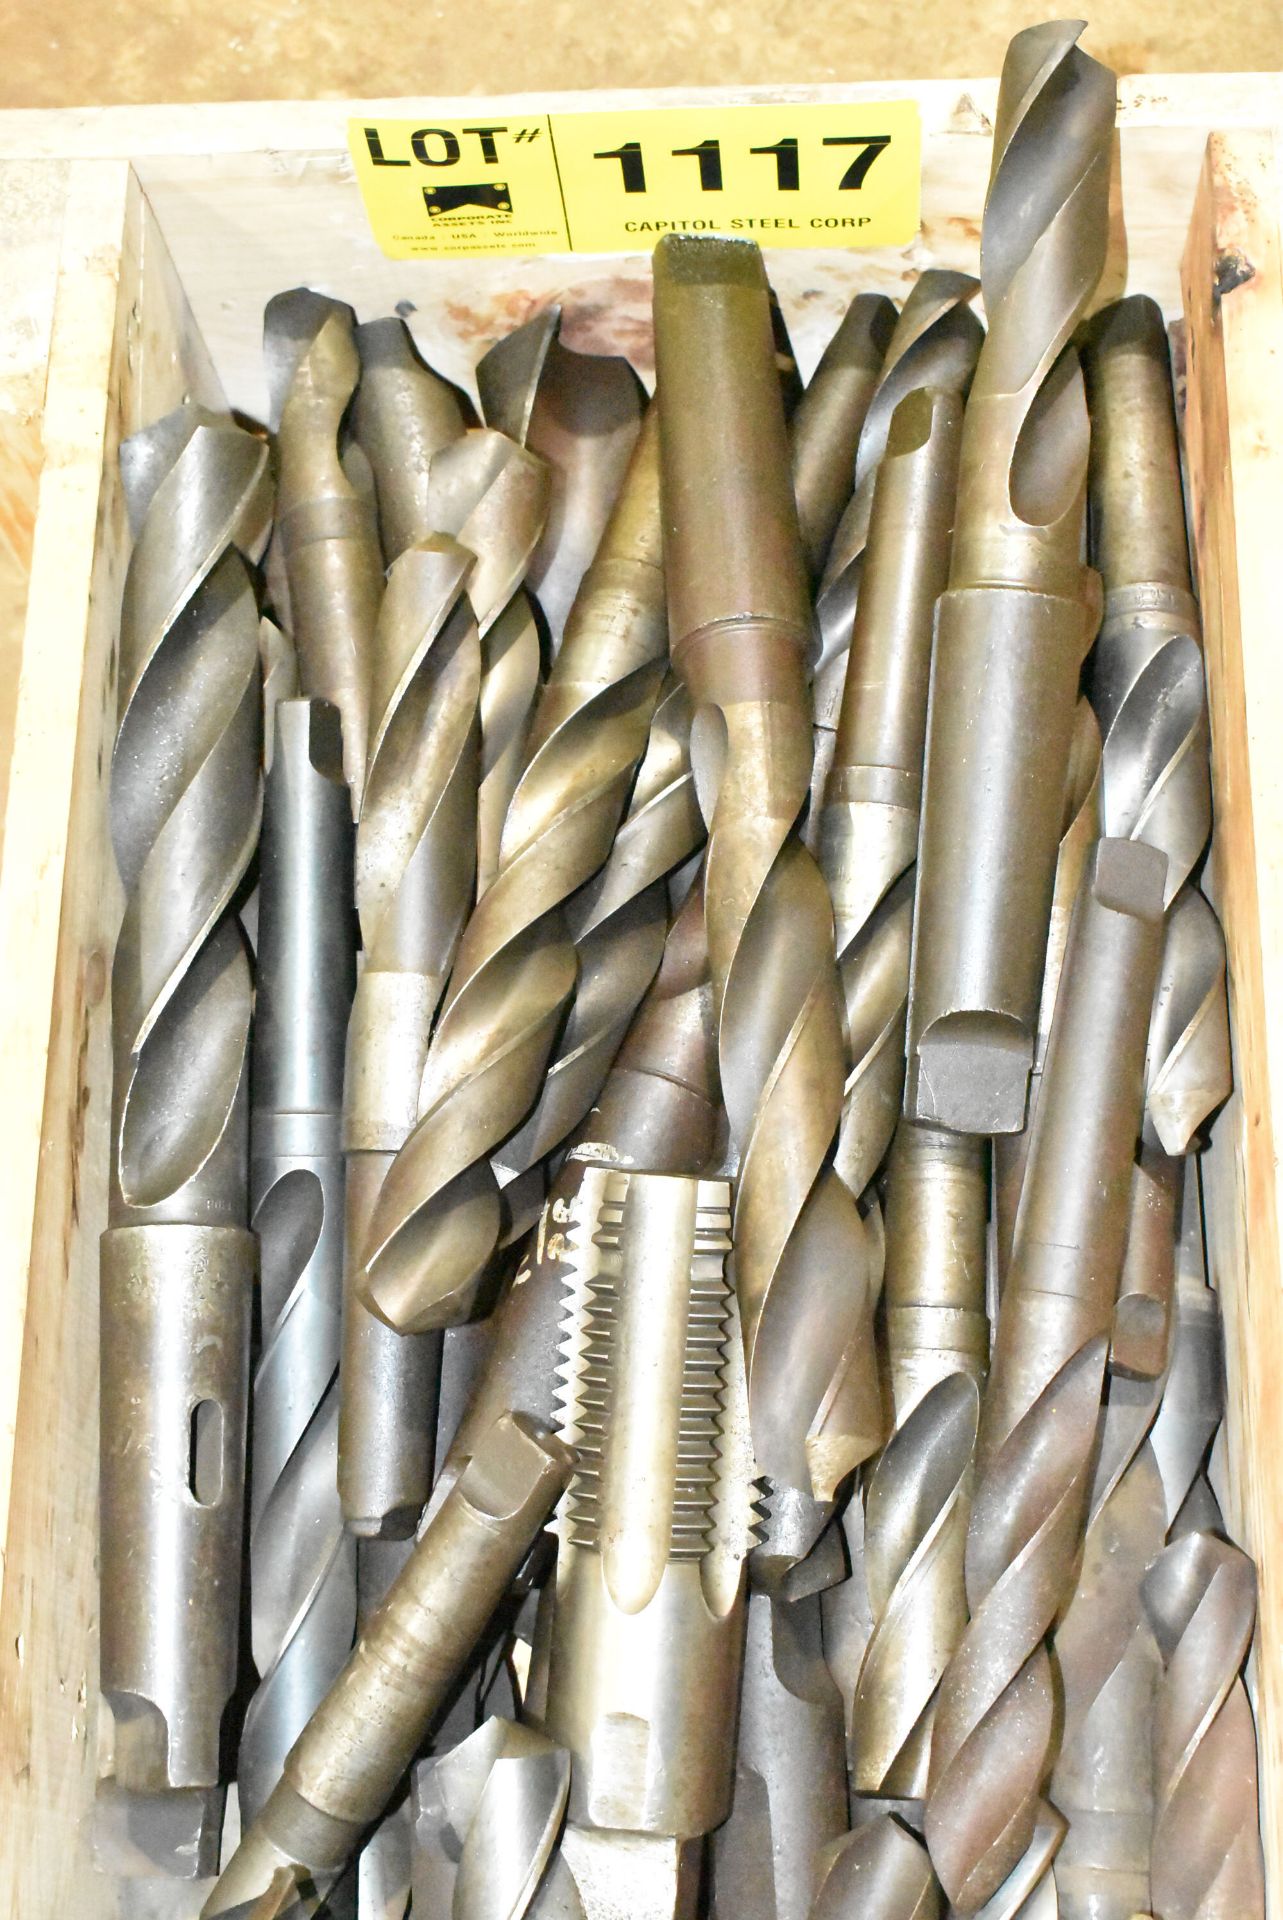 LOT/ HEAVY DUTY TAPER SHANK DRILLS [RIGGING FEES FOR LOT #1117 - $30 USD PLUS APPLICABLE TAXES] - Image 3 of 3